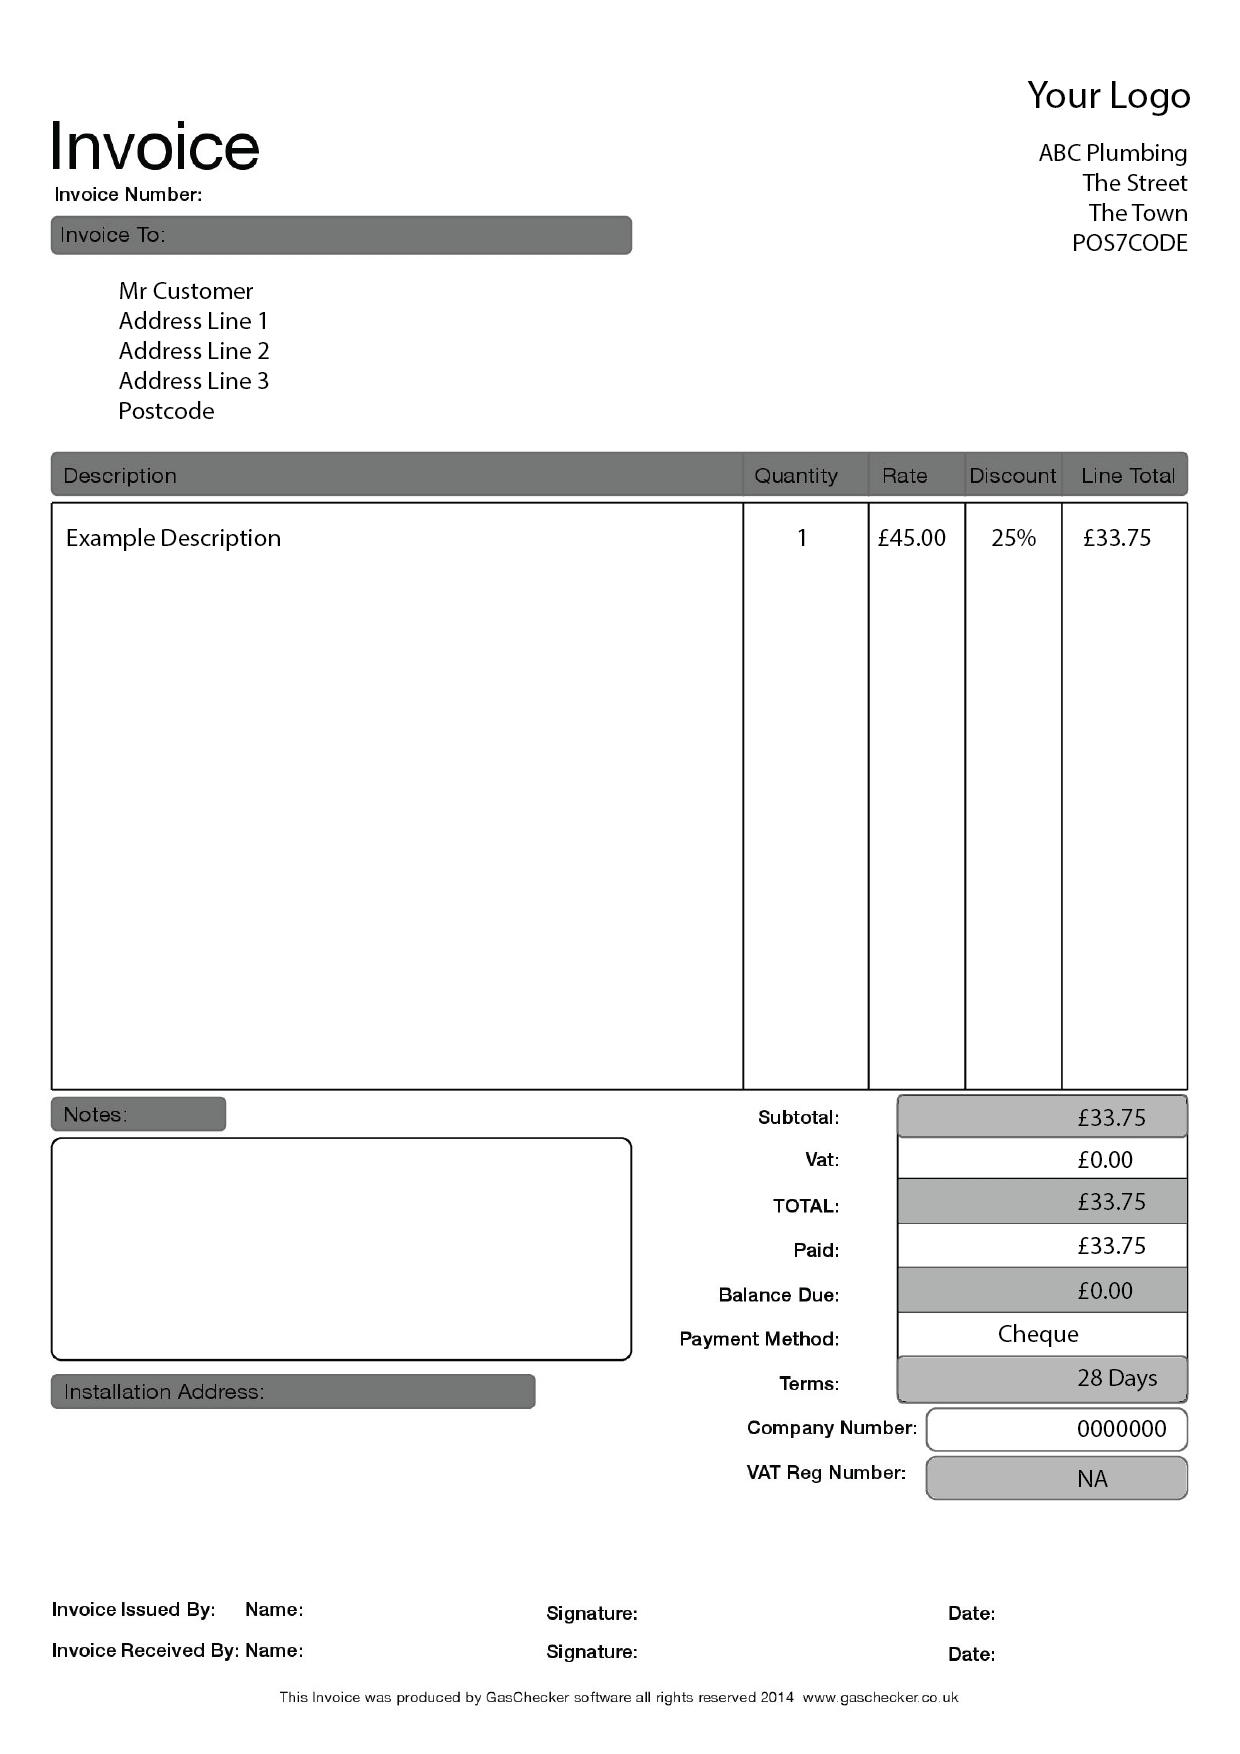 gas checker invoice software for gas engineers and plumbers invoice payment terms uk